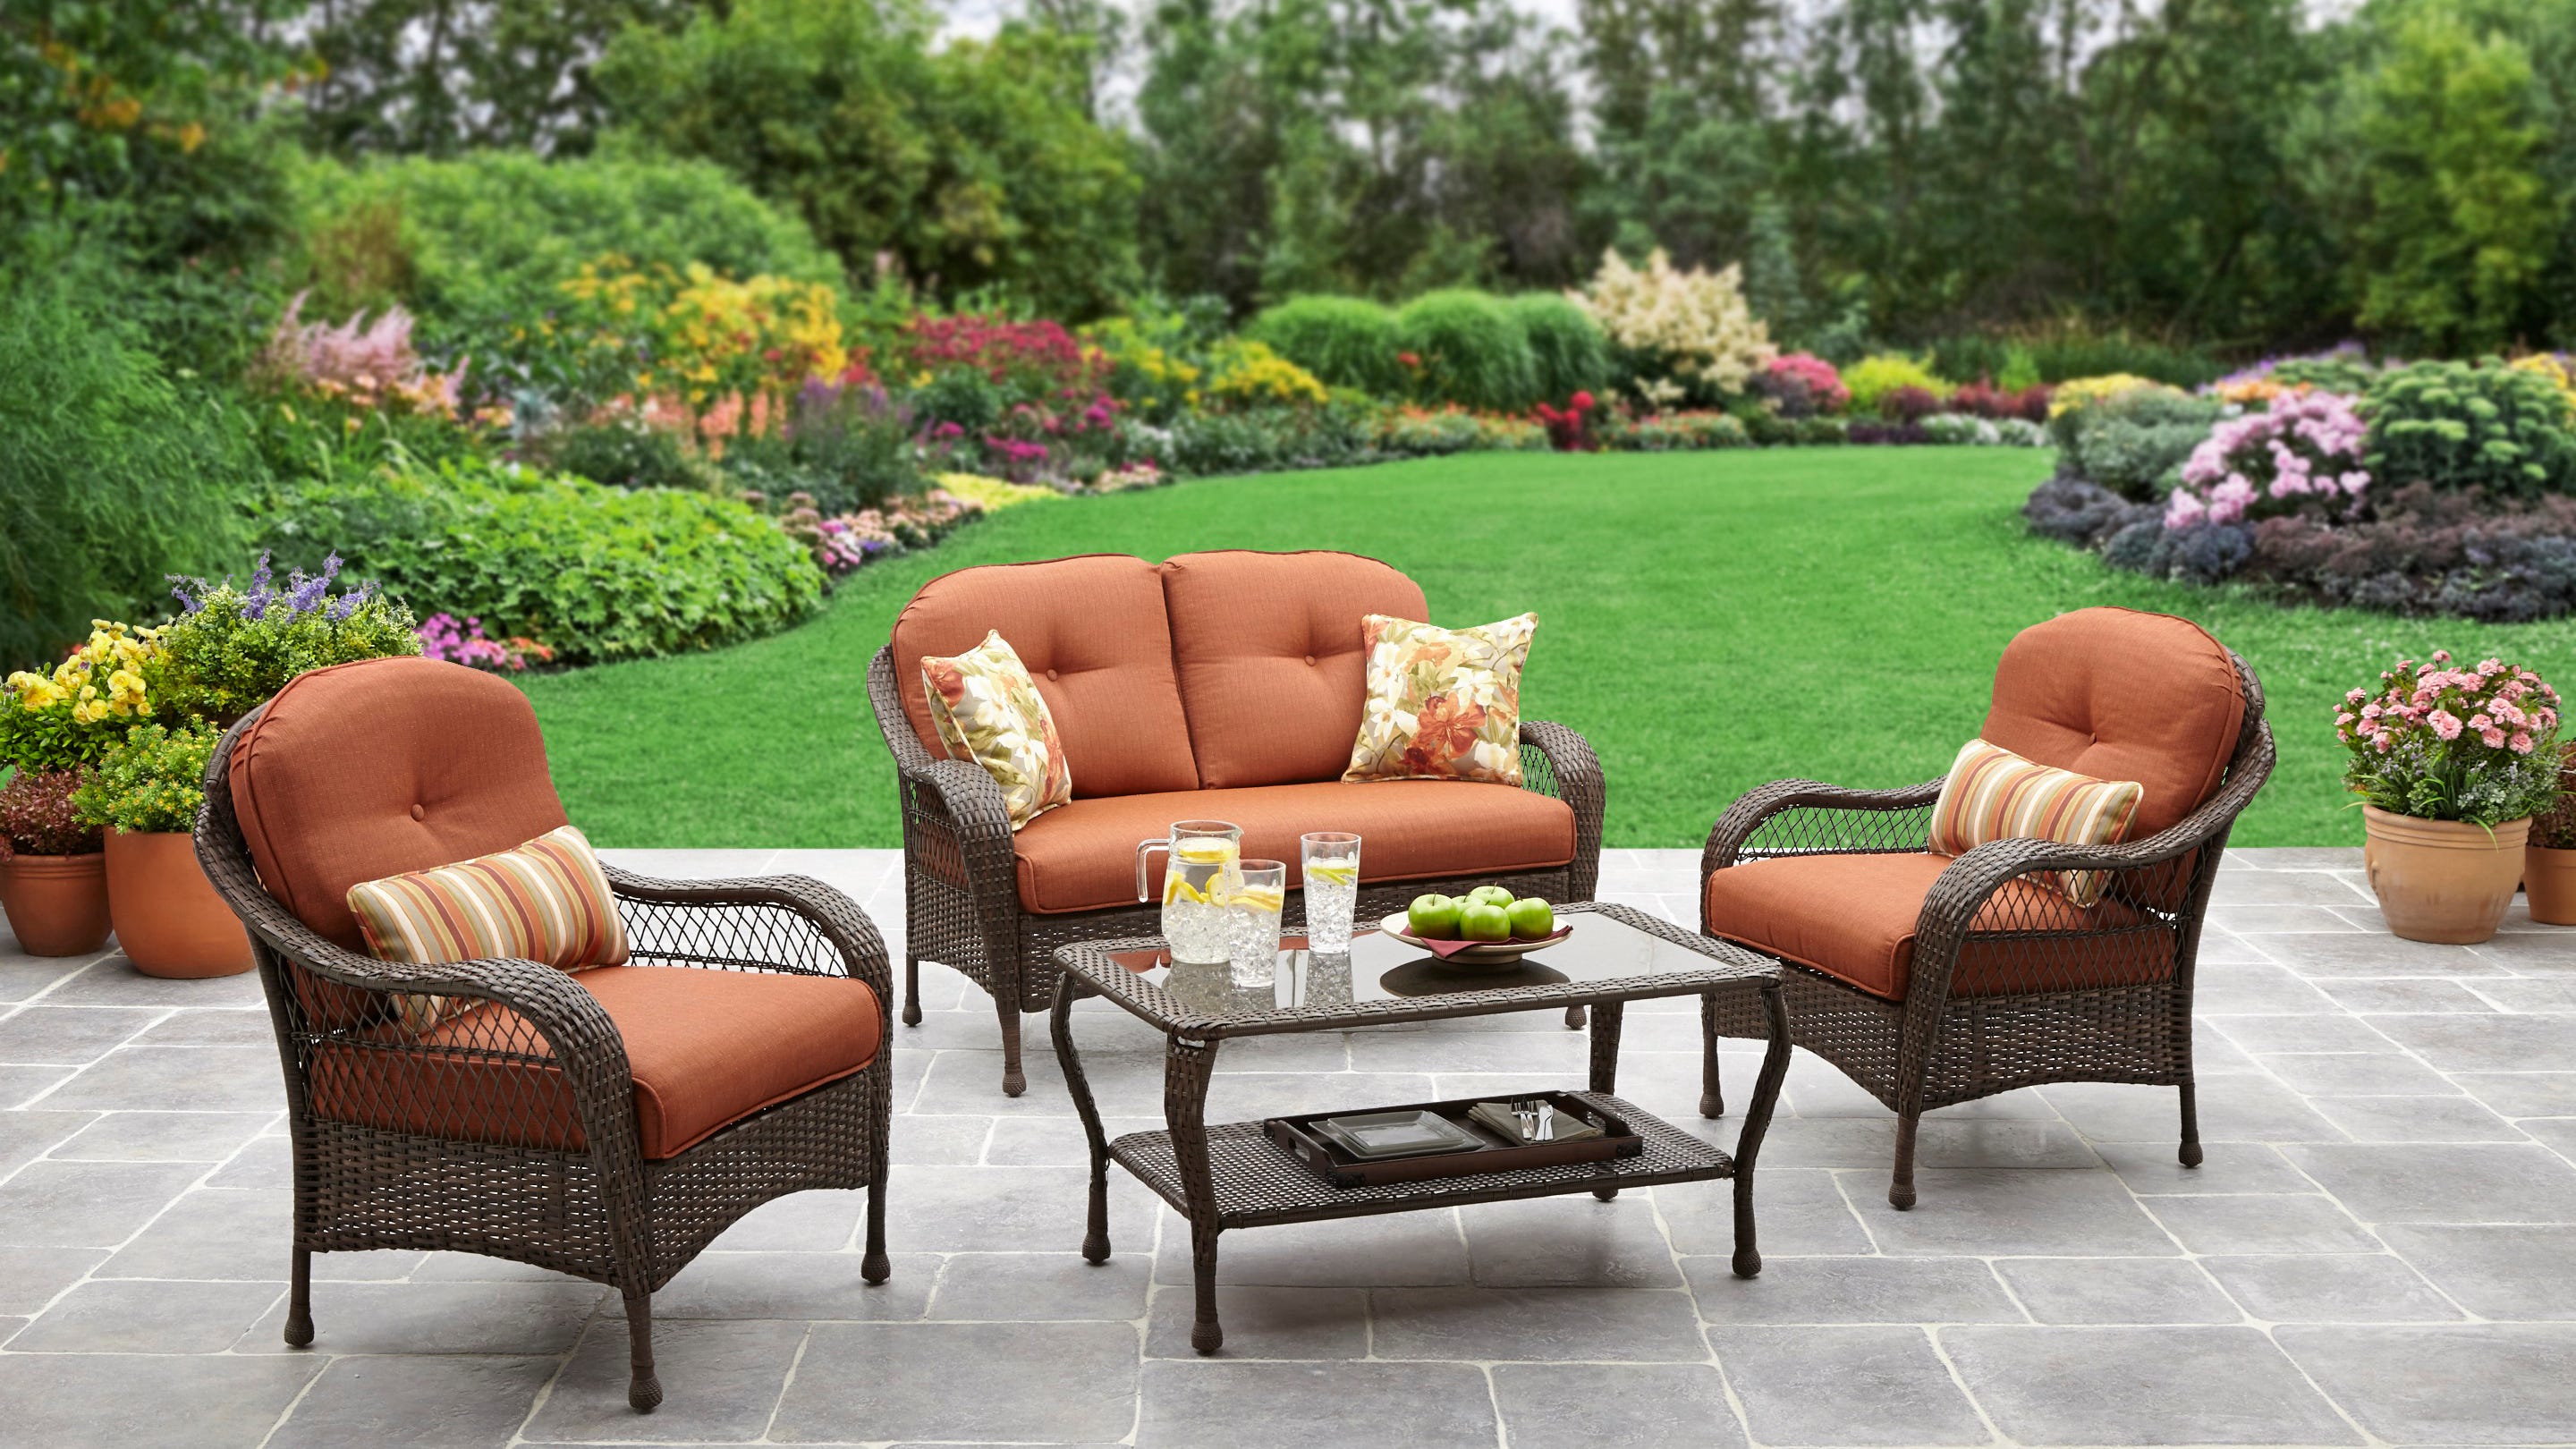 The Best Patio and Outdoor Furniture From Wayfair 2021 